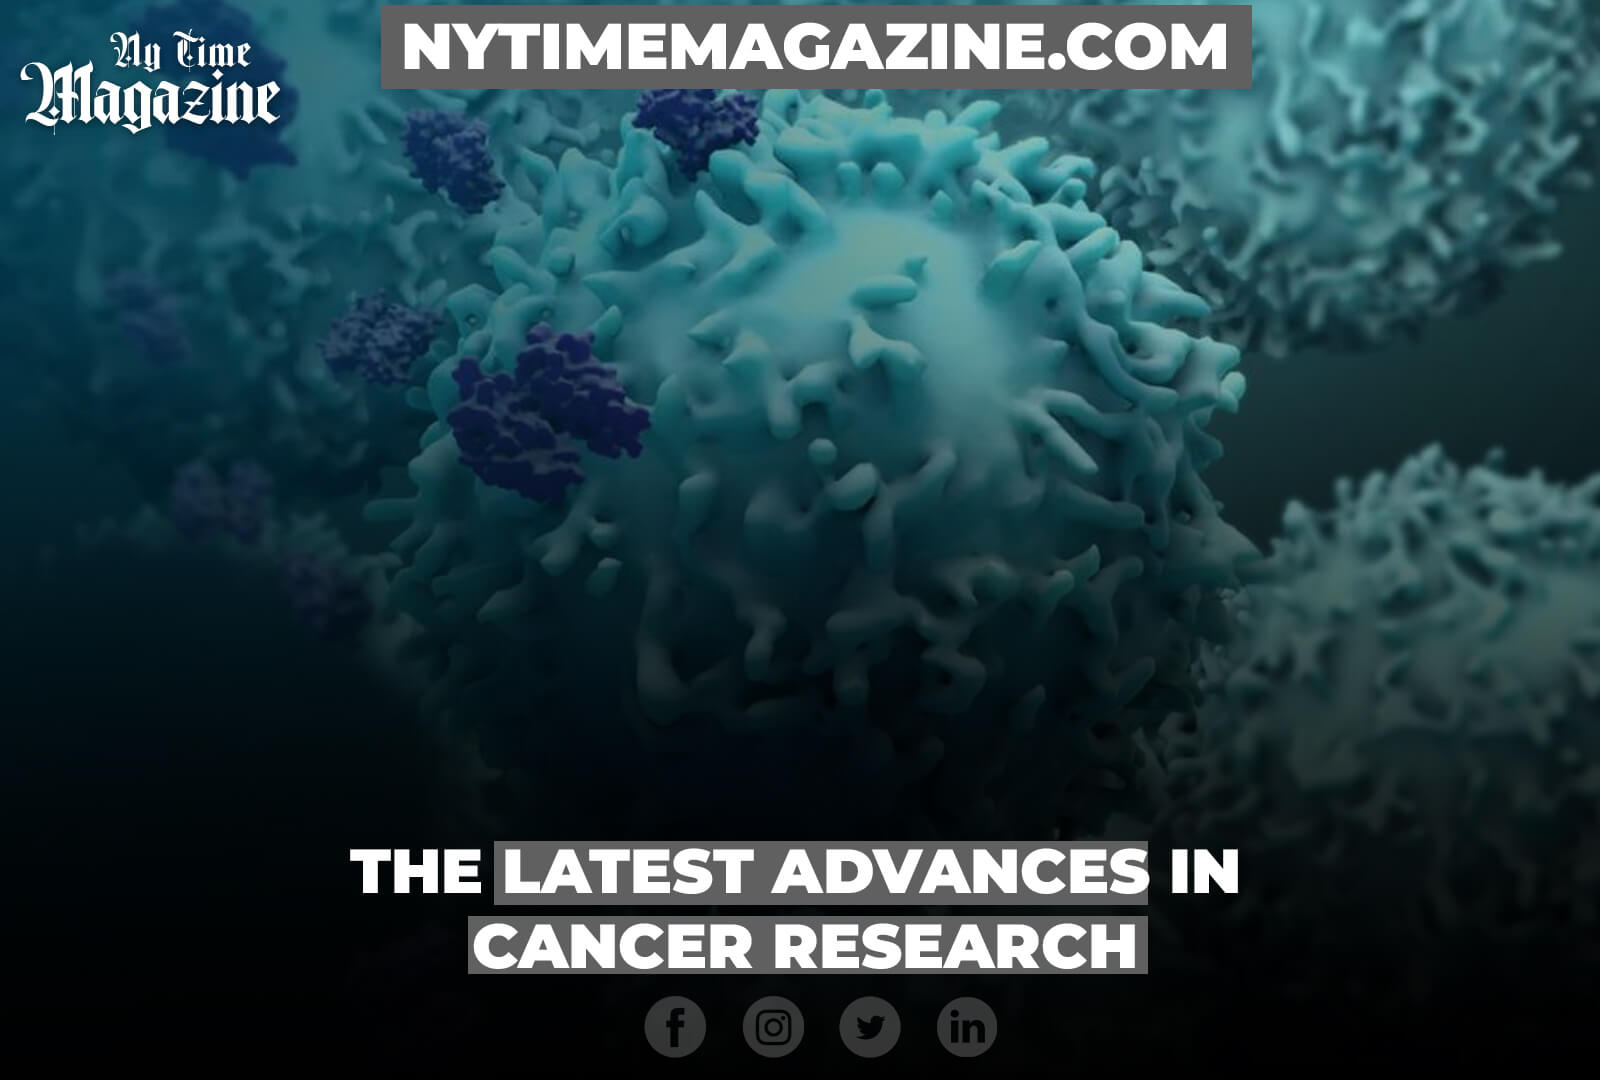 The latest advances in cancer research